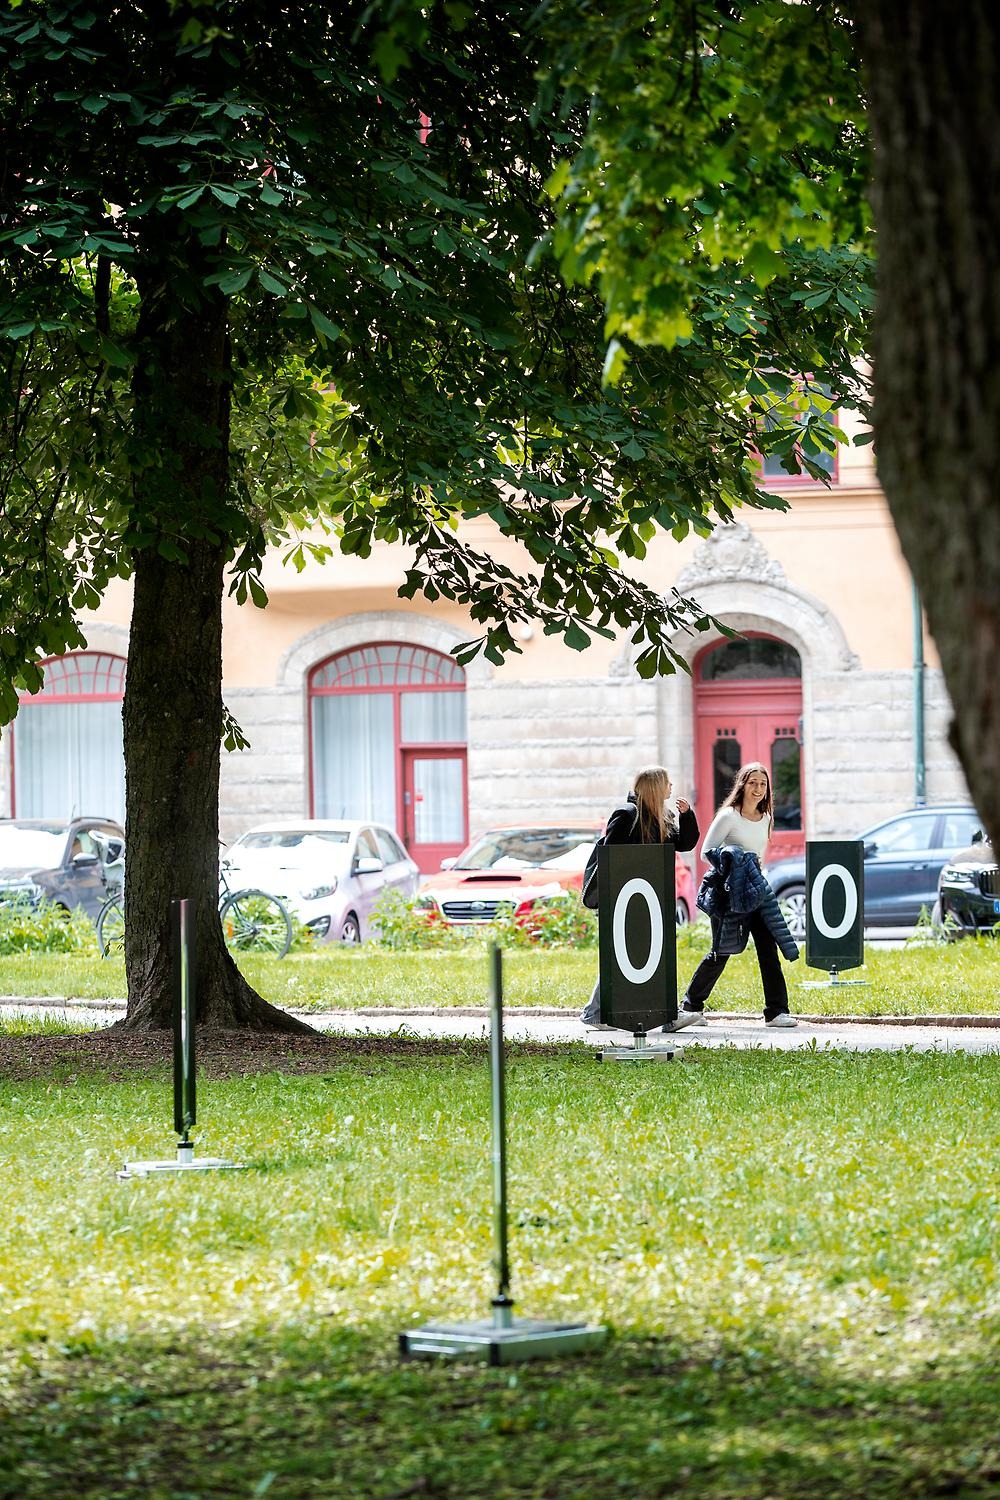 In a park, black pavement signs with the numbers 1 and 0 are placed. The picture shows four signs and two people walking by in the background.